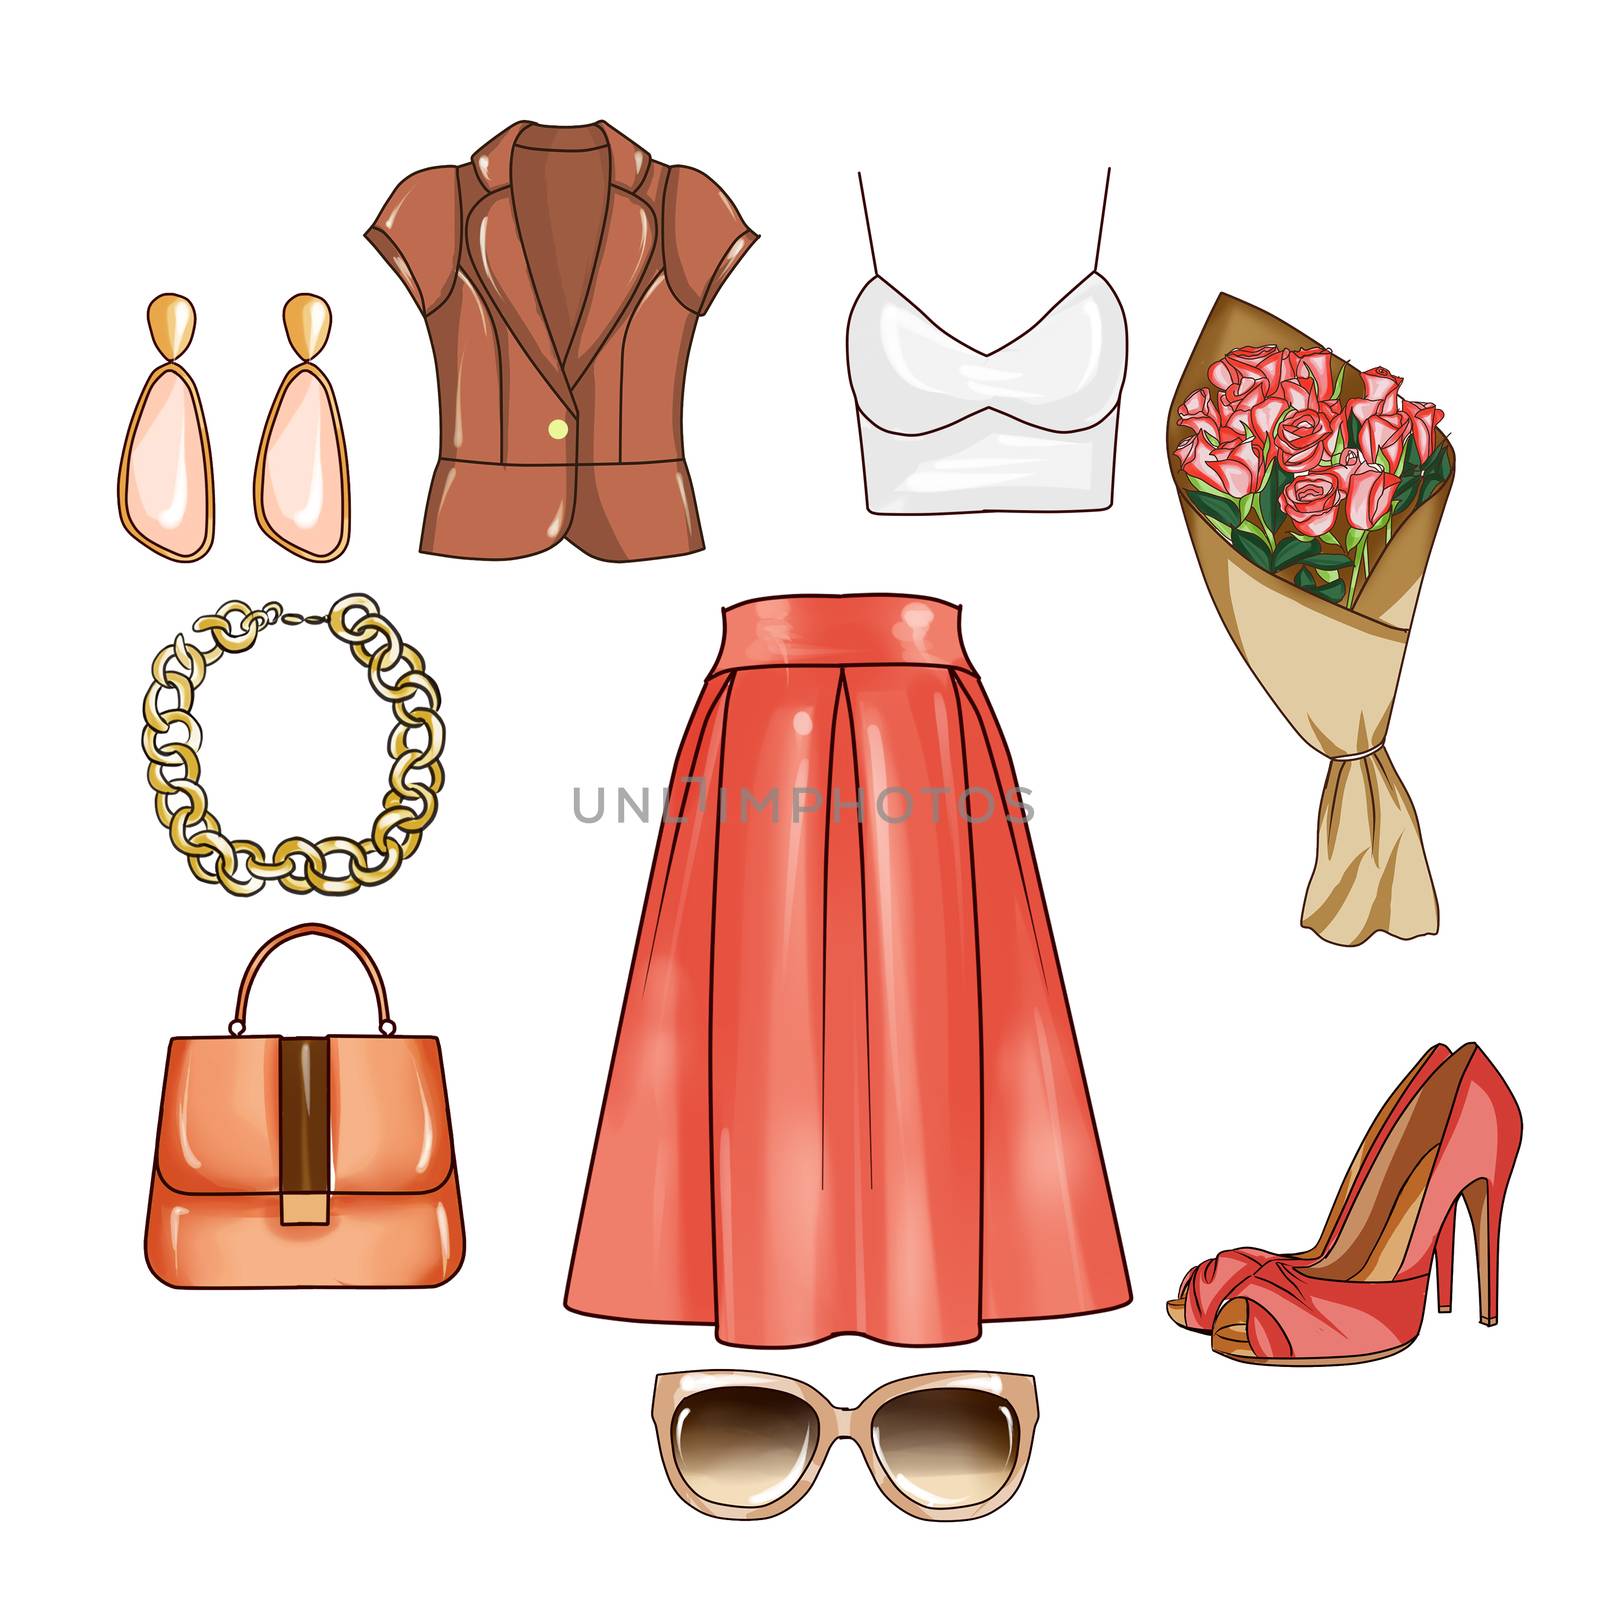 Fashion set of woman's clothes and accessories - Top, skirt, jewels, hand bag, heel shoes, sunglasses, flowers by GGillustrations